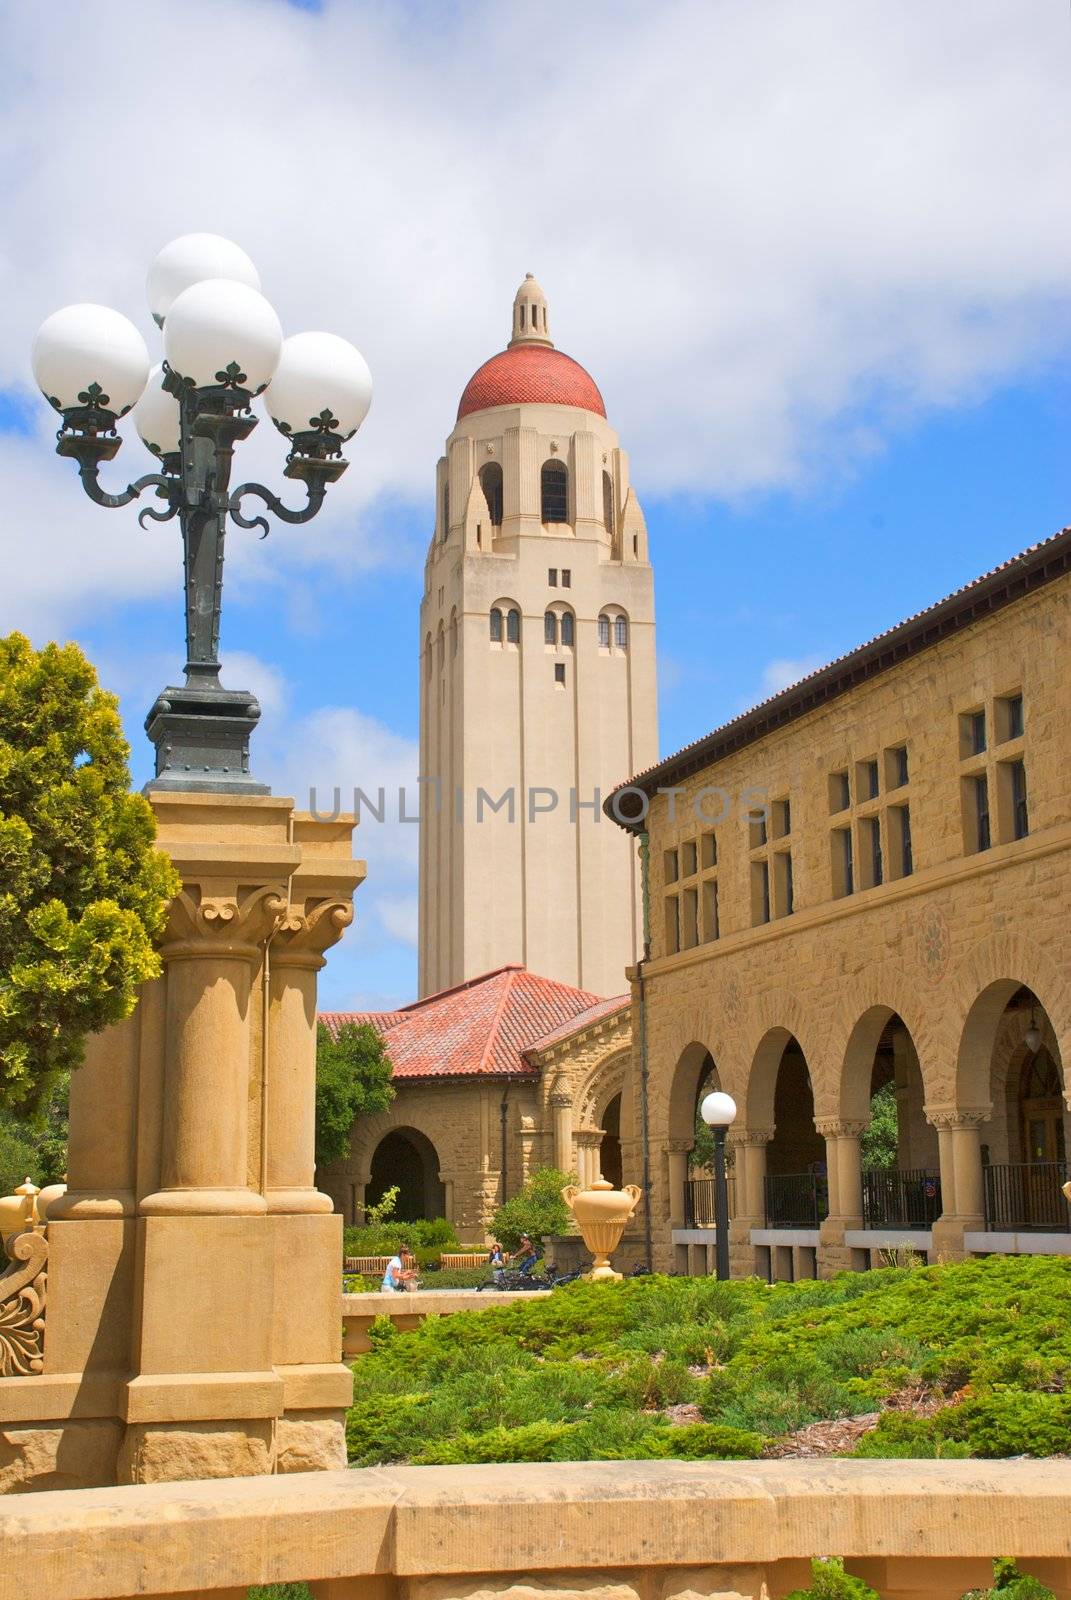 Hoover Tower and Buildings at Stanford University by pixelsnap